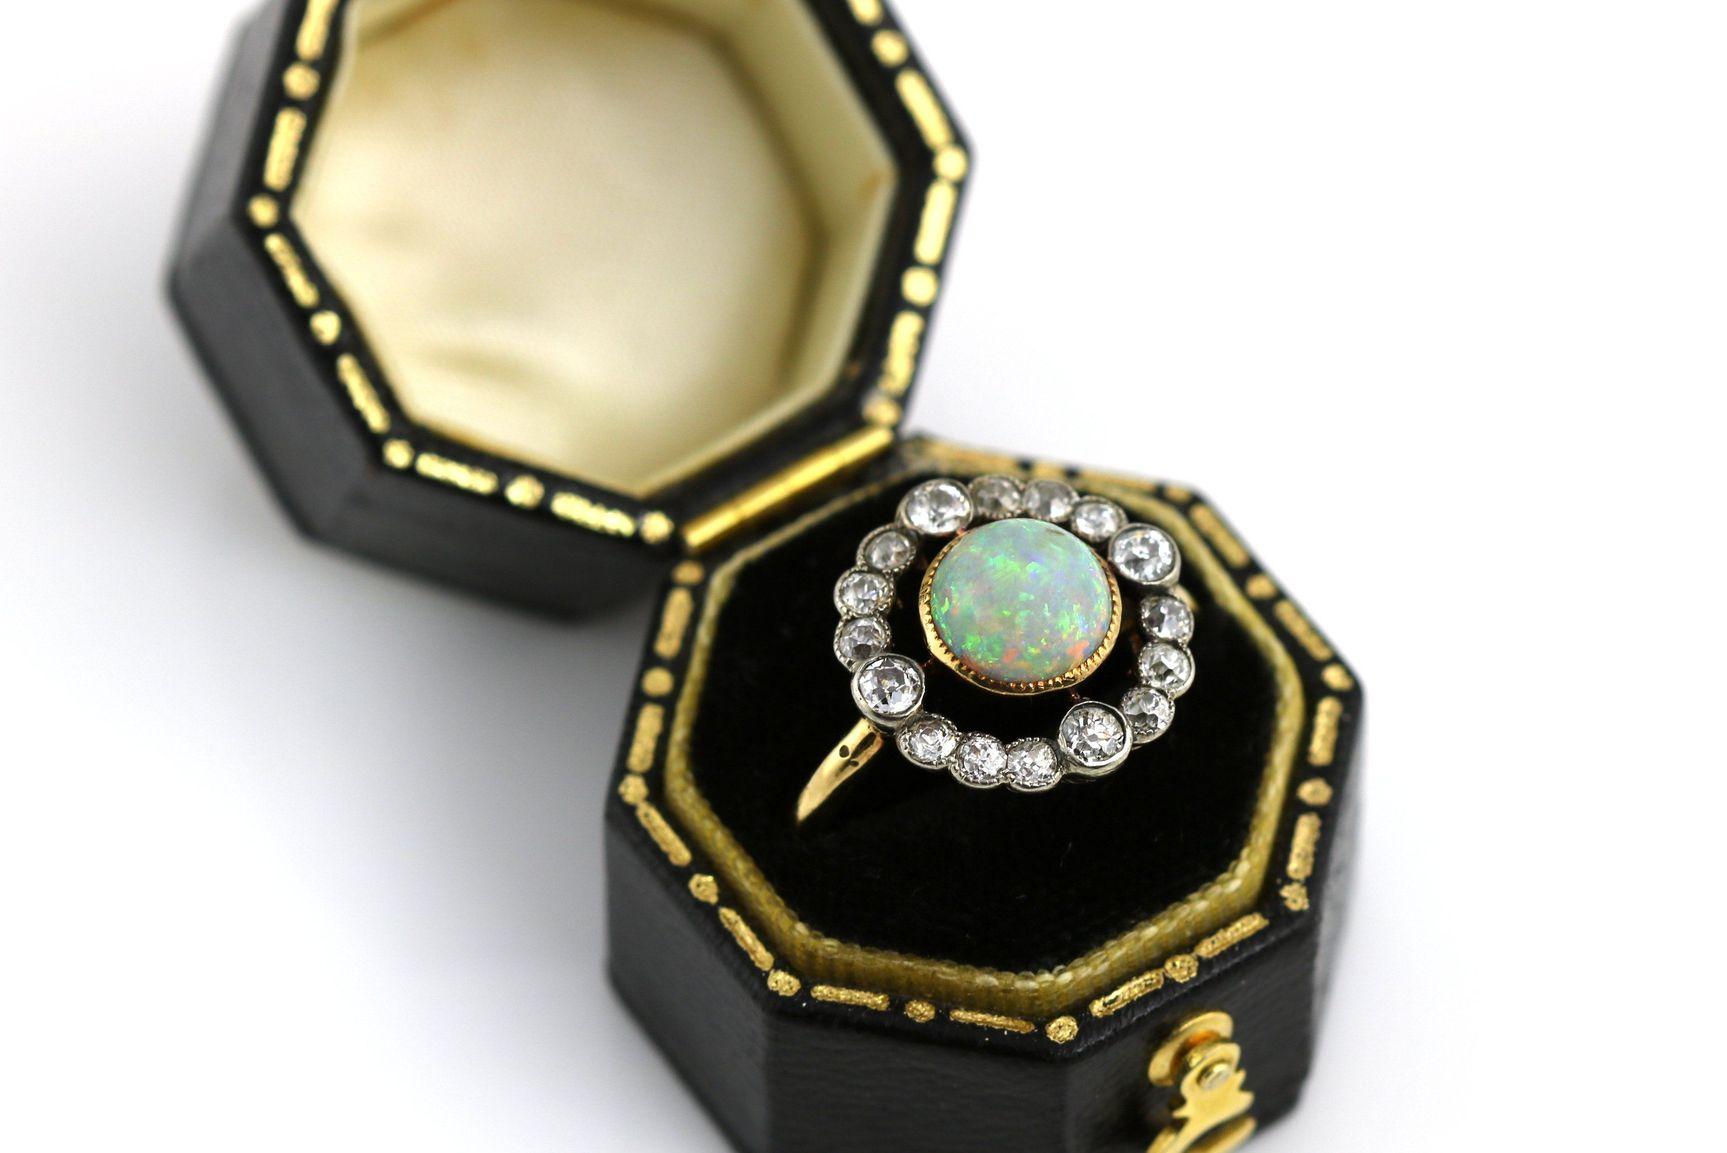 An antique 18ct gold opal and diamond cluster ring